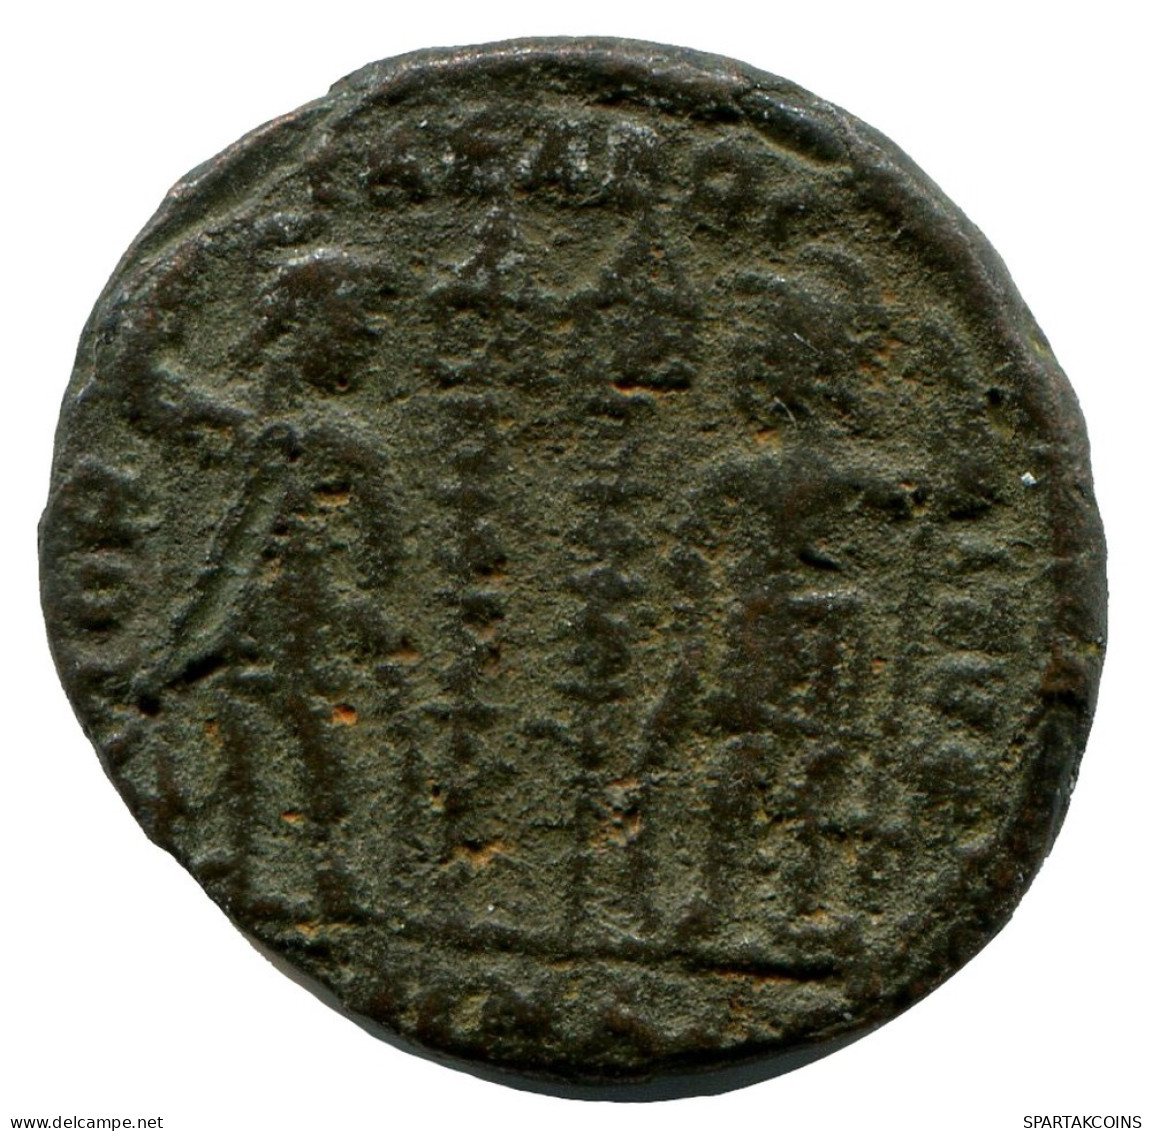 CONSTANTINE I MINTED IN NICOMEDIA FOUND IN IHNASYAH HOARD EGYPT #ANC10925.14.U.A - The Christian Empire (307 AD To 363 AD)